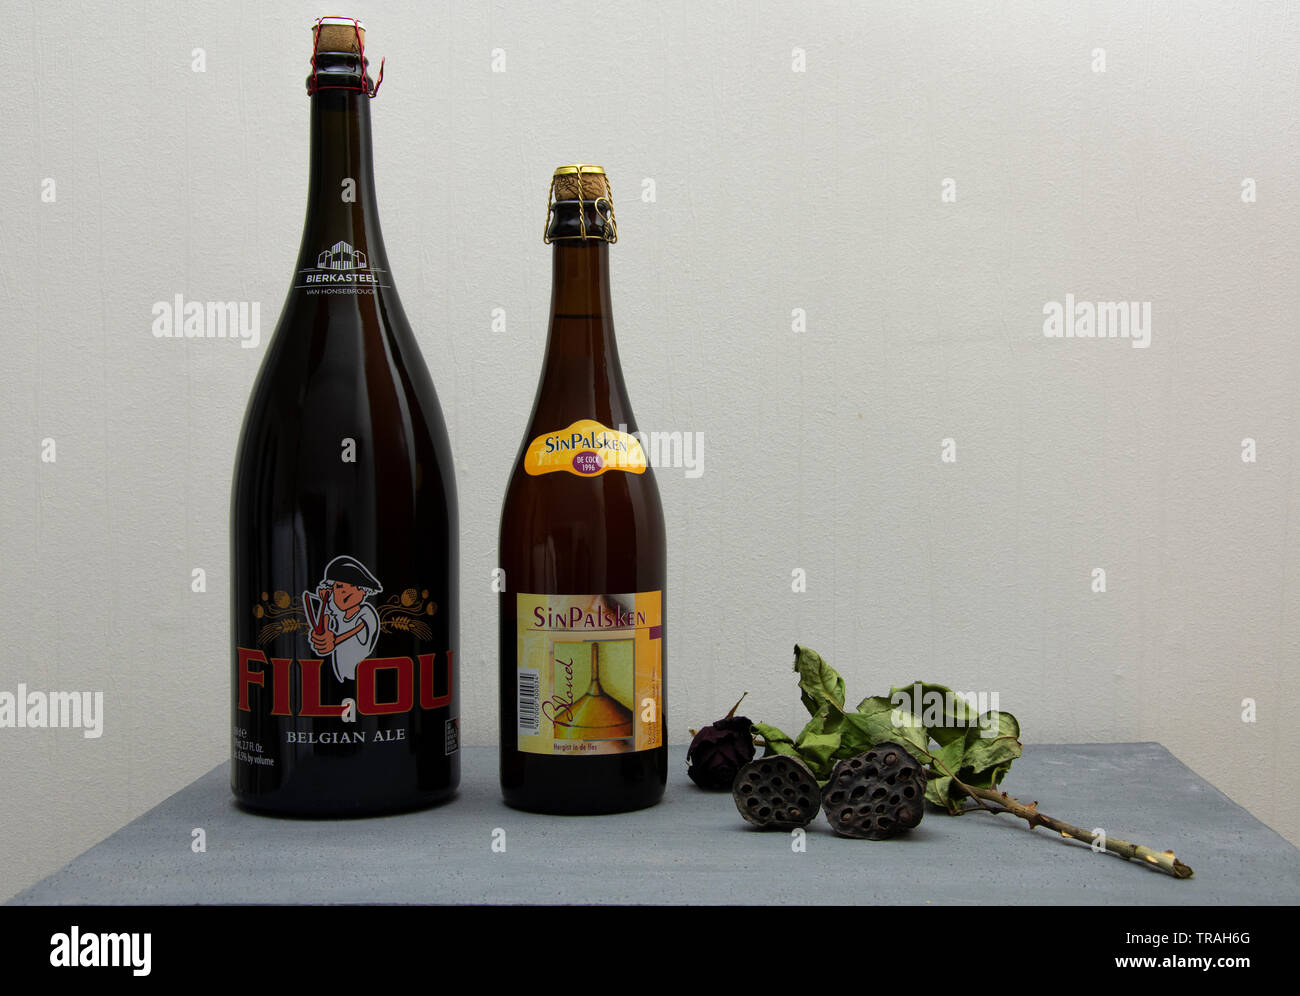 Sint Gillis waas, Belgium - December 1, 2018: Two Belgian beers Filou and St. Palsken in large bottles and with Crown Cap Stock Photo